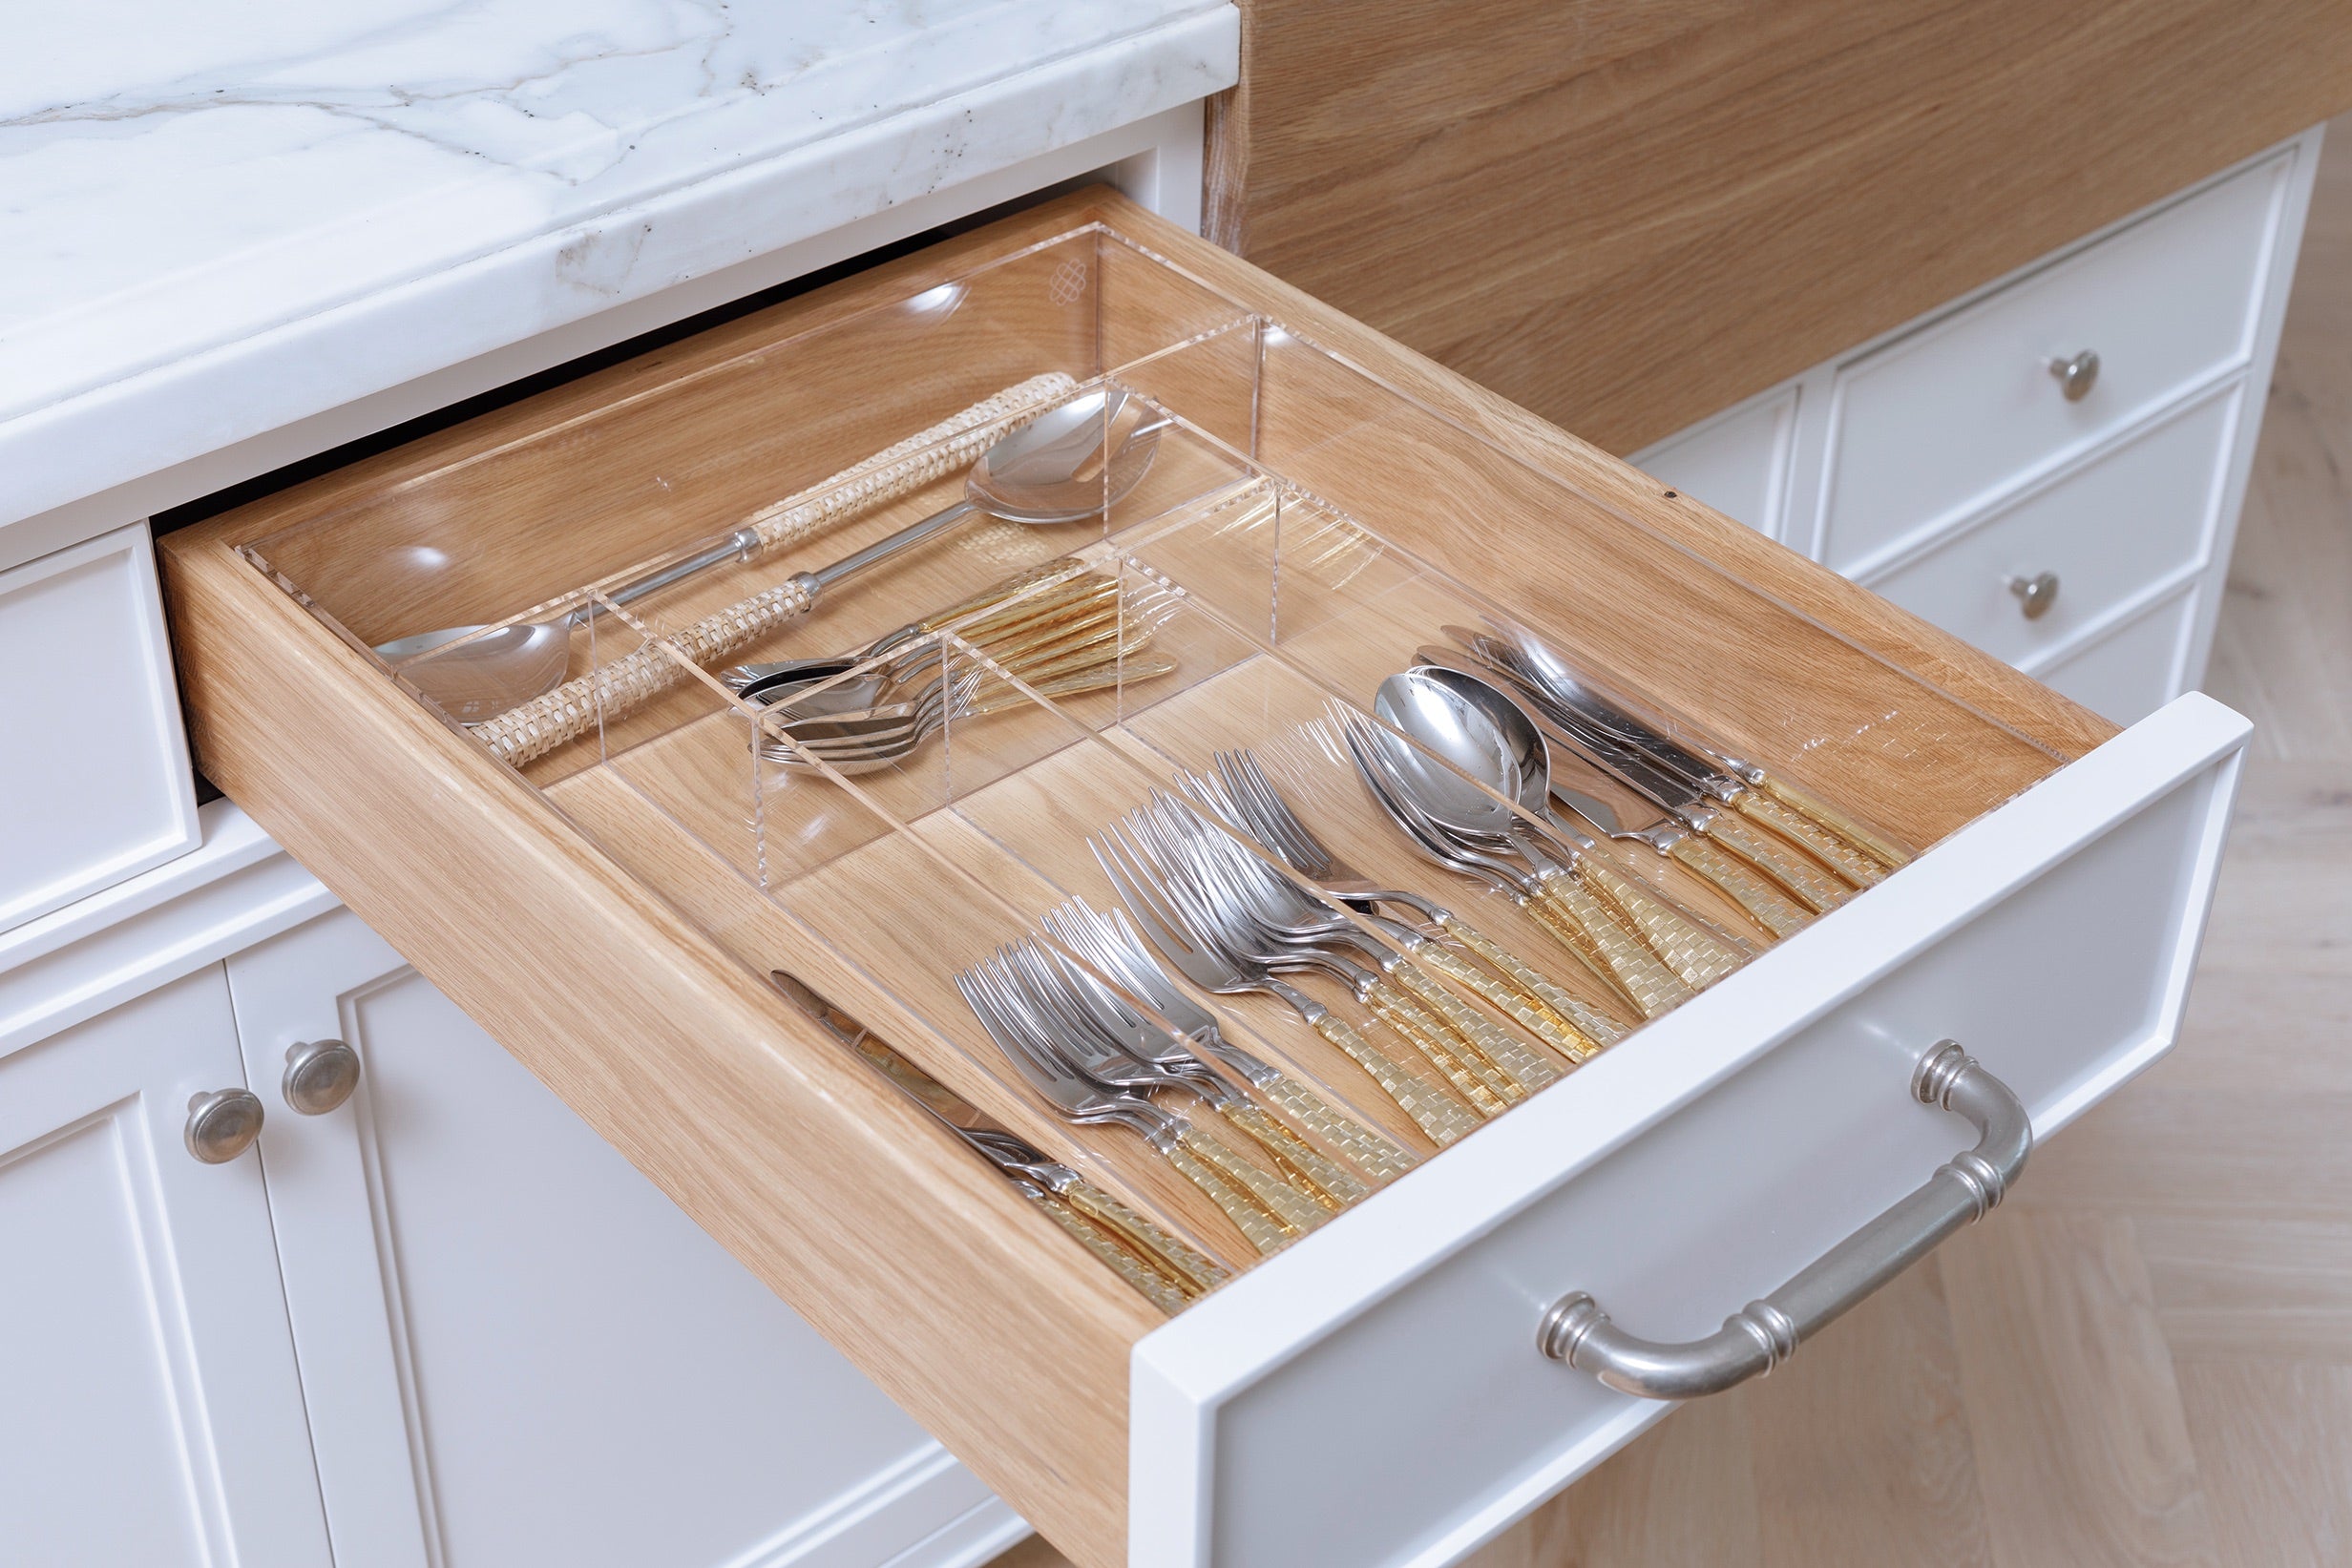 Drawer containing silverware organized in a clear acrylic organizer. 